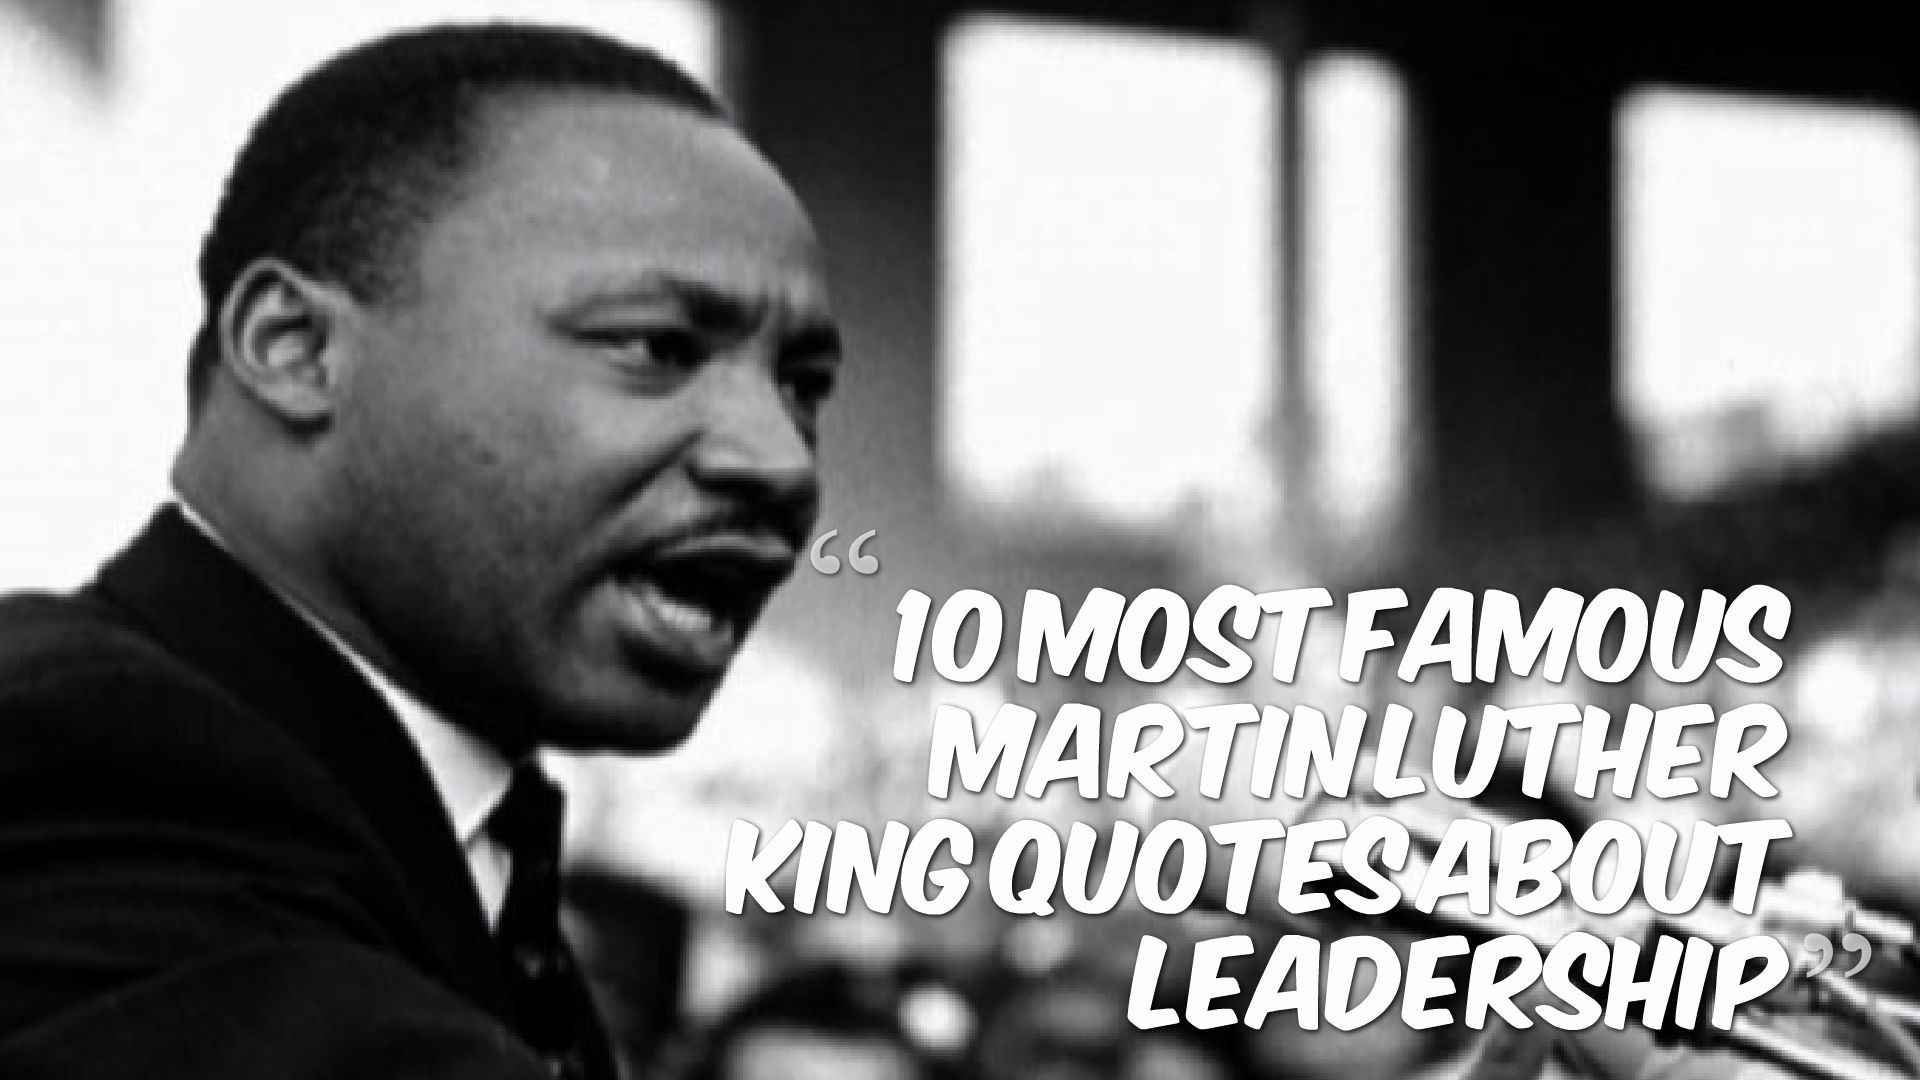 Martin Luther King Jr Quotes On Leadership
 Quotes about Leadership martin luther king 24 quotes